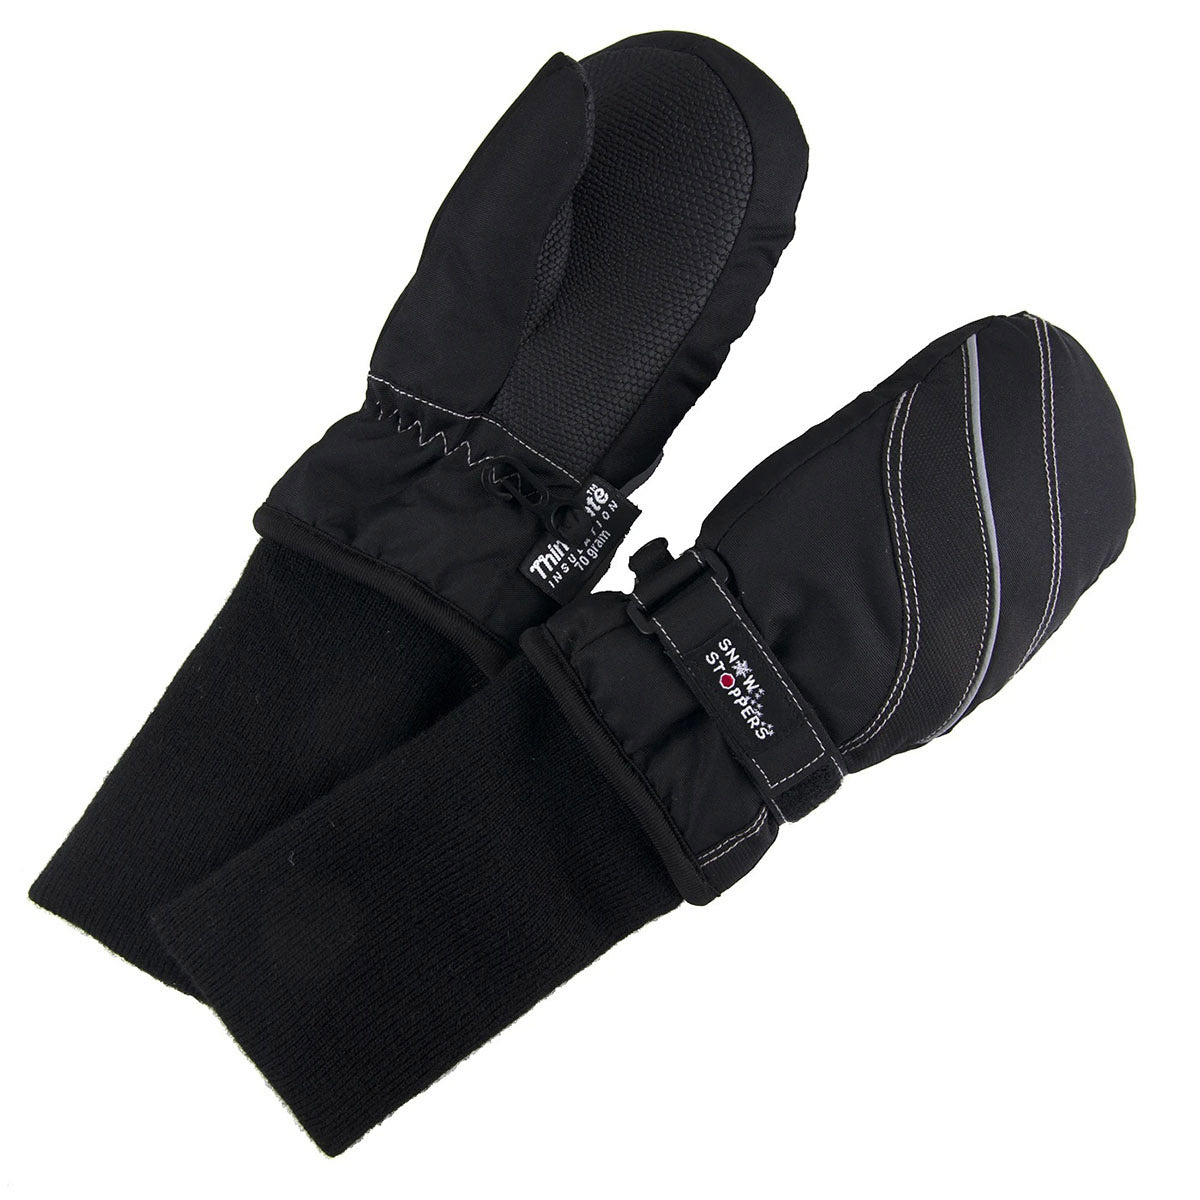 A pair of black Snowstoppers Kids Ski Mittens insulated with Thinsulate and wrist straps on a white background.